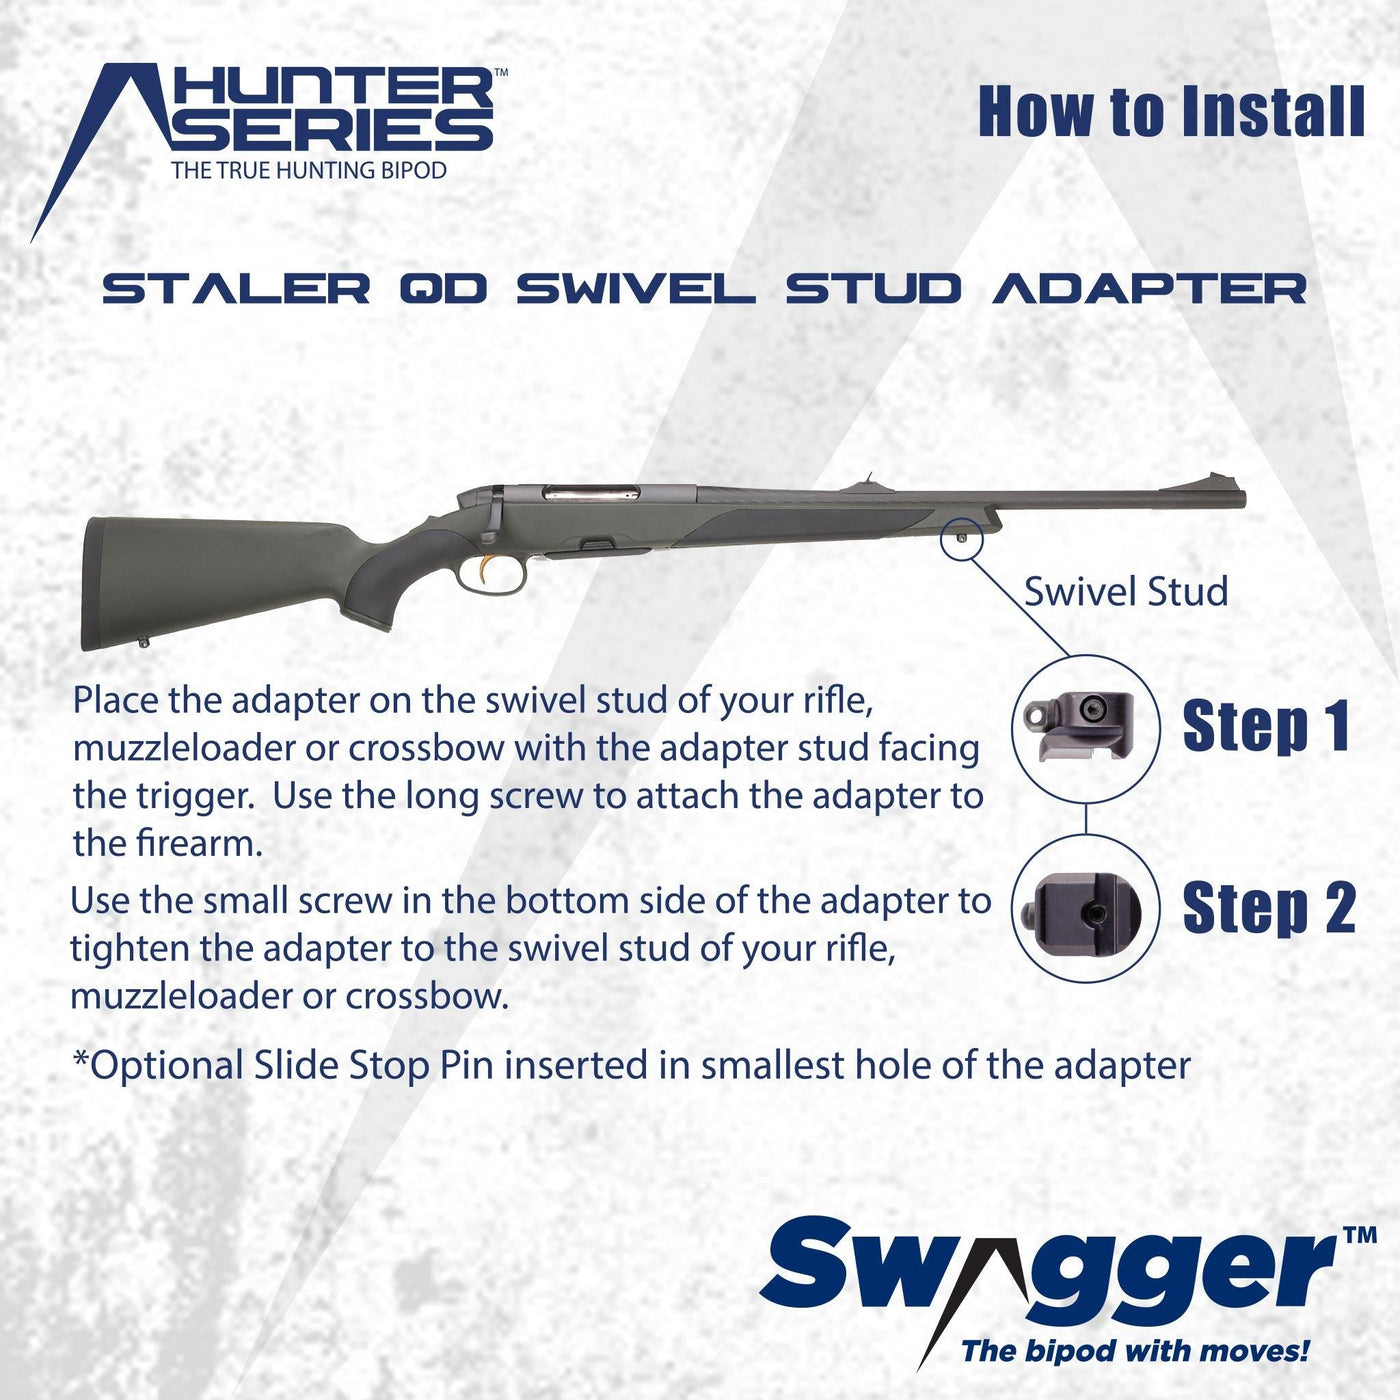 Instructions for installing the Swagger Bipod QD Swivel Stud Adapter